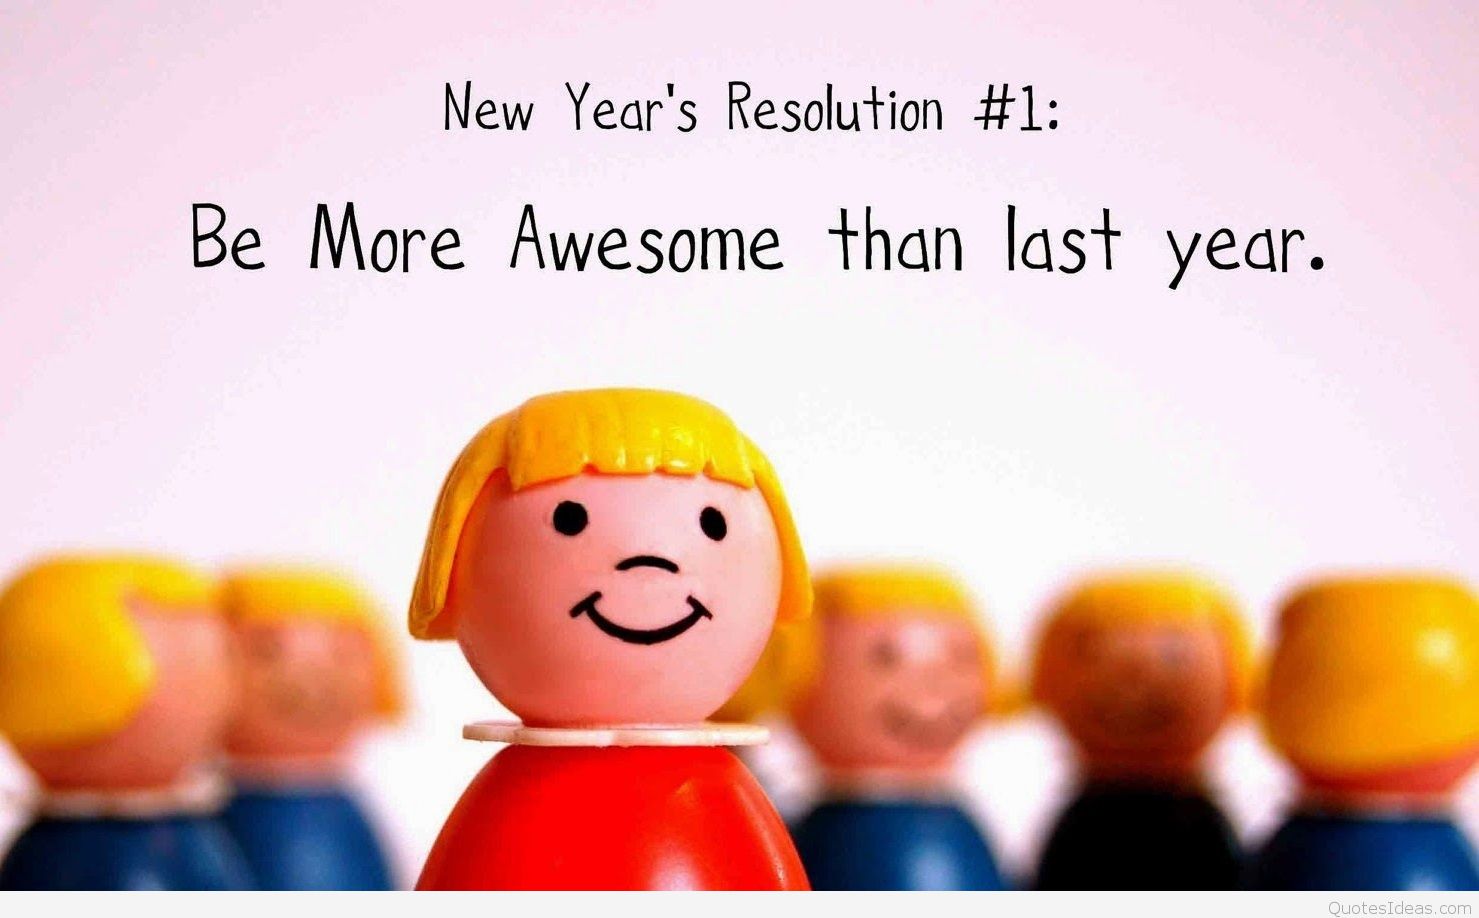 A toy girl on a pink background, with text above: "New Year's Resolution #1: Be More Awesome than last year."